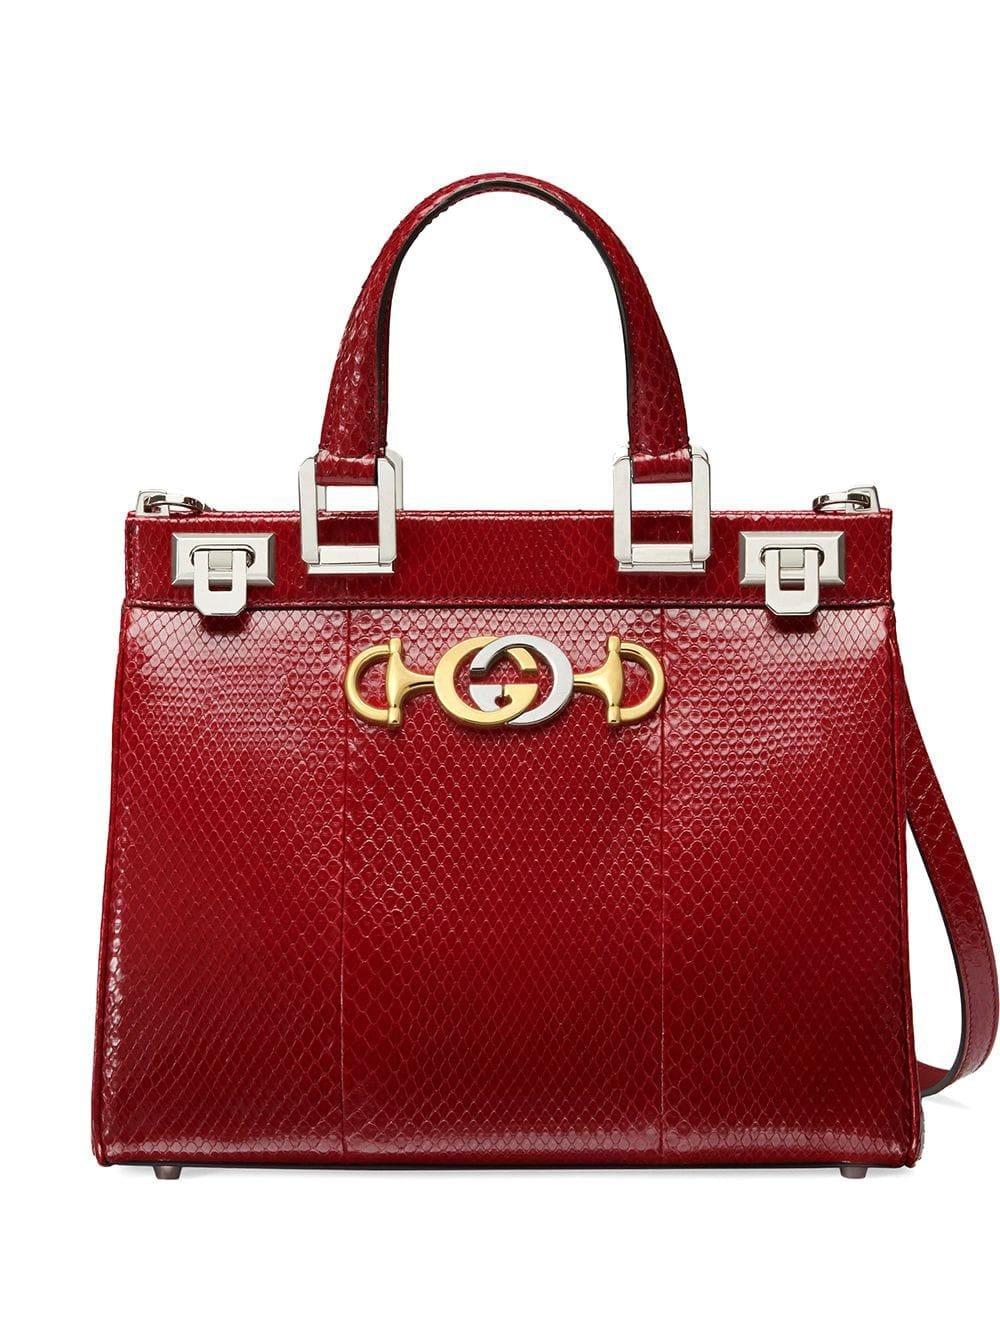 Gucci Leather Zumi Snakeskin Small Top Handle Bag in Red | Lyst